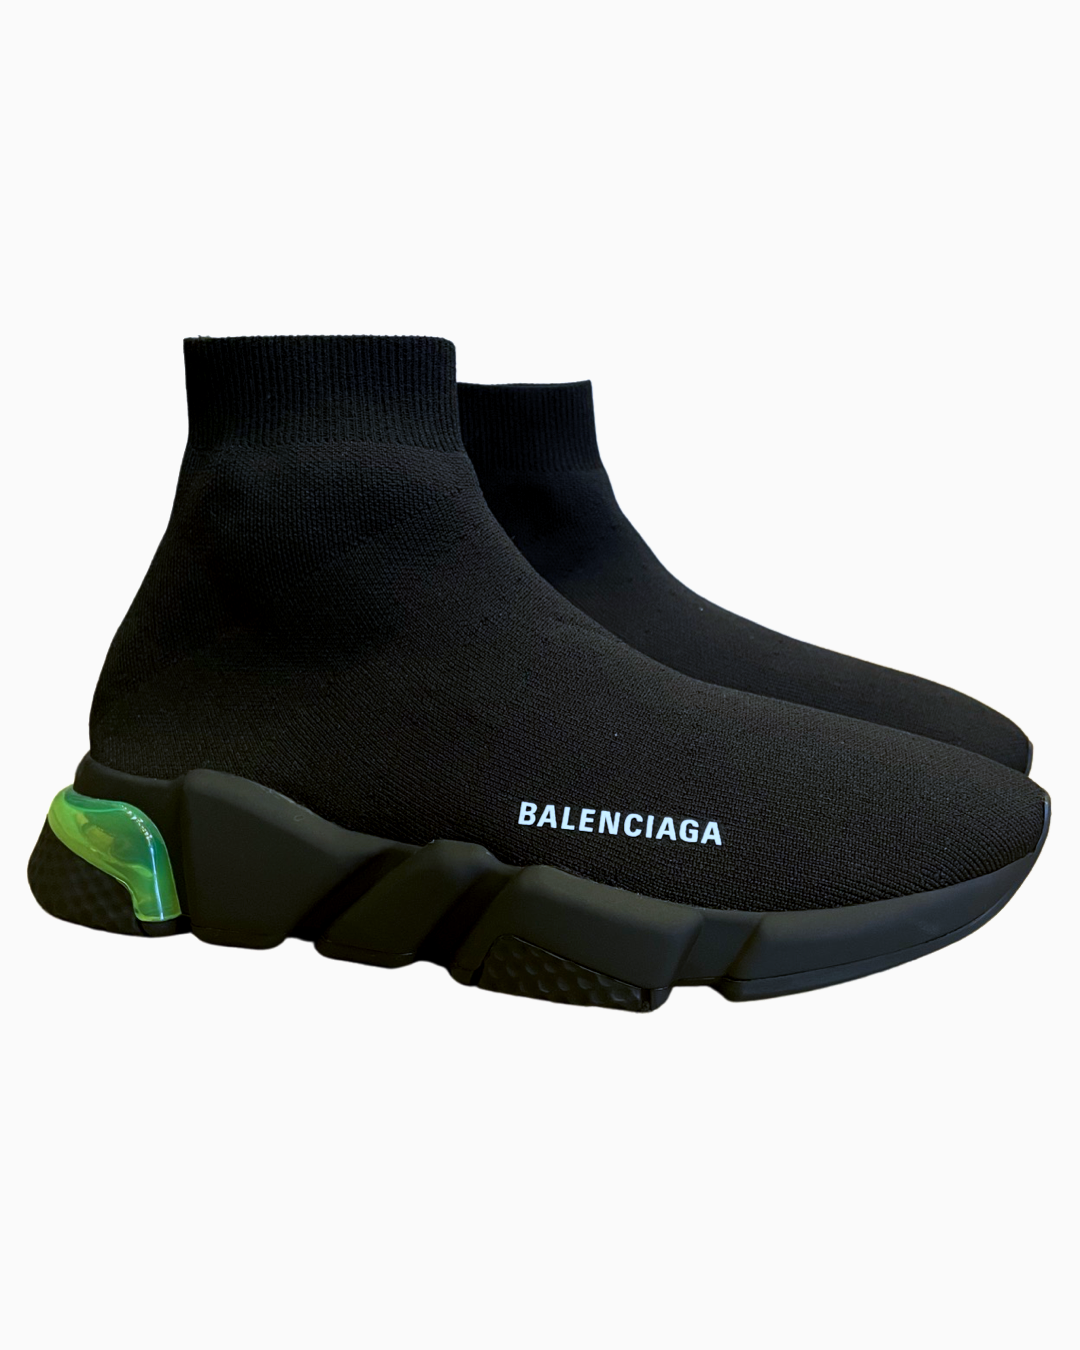 Balenciaga Speed Clear Sole Sneakers In Black  Red Clear Sole Unit   Grailed